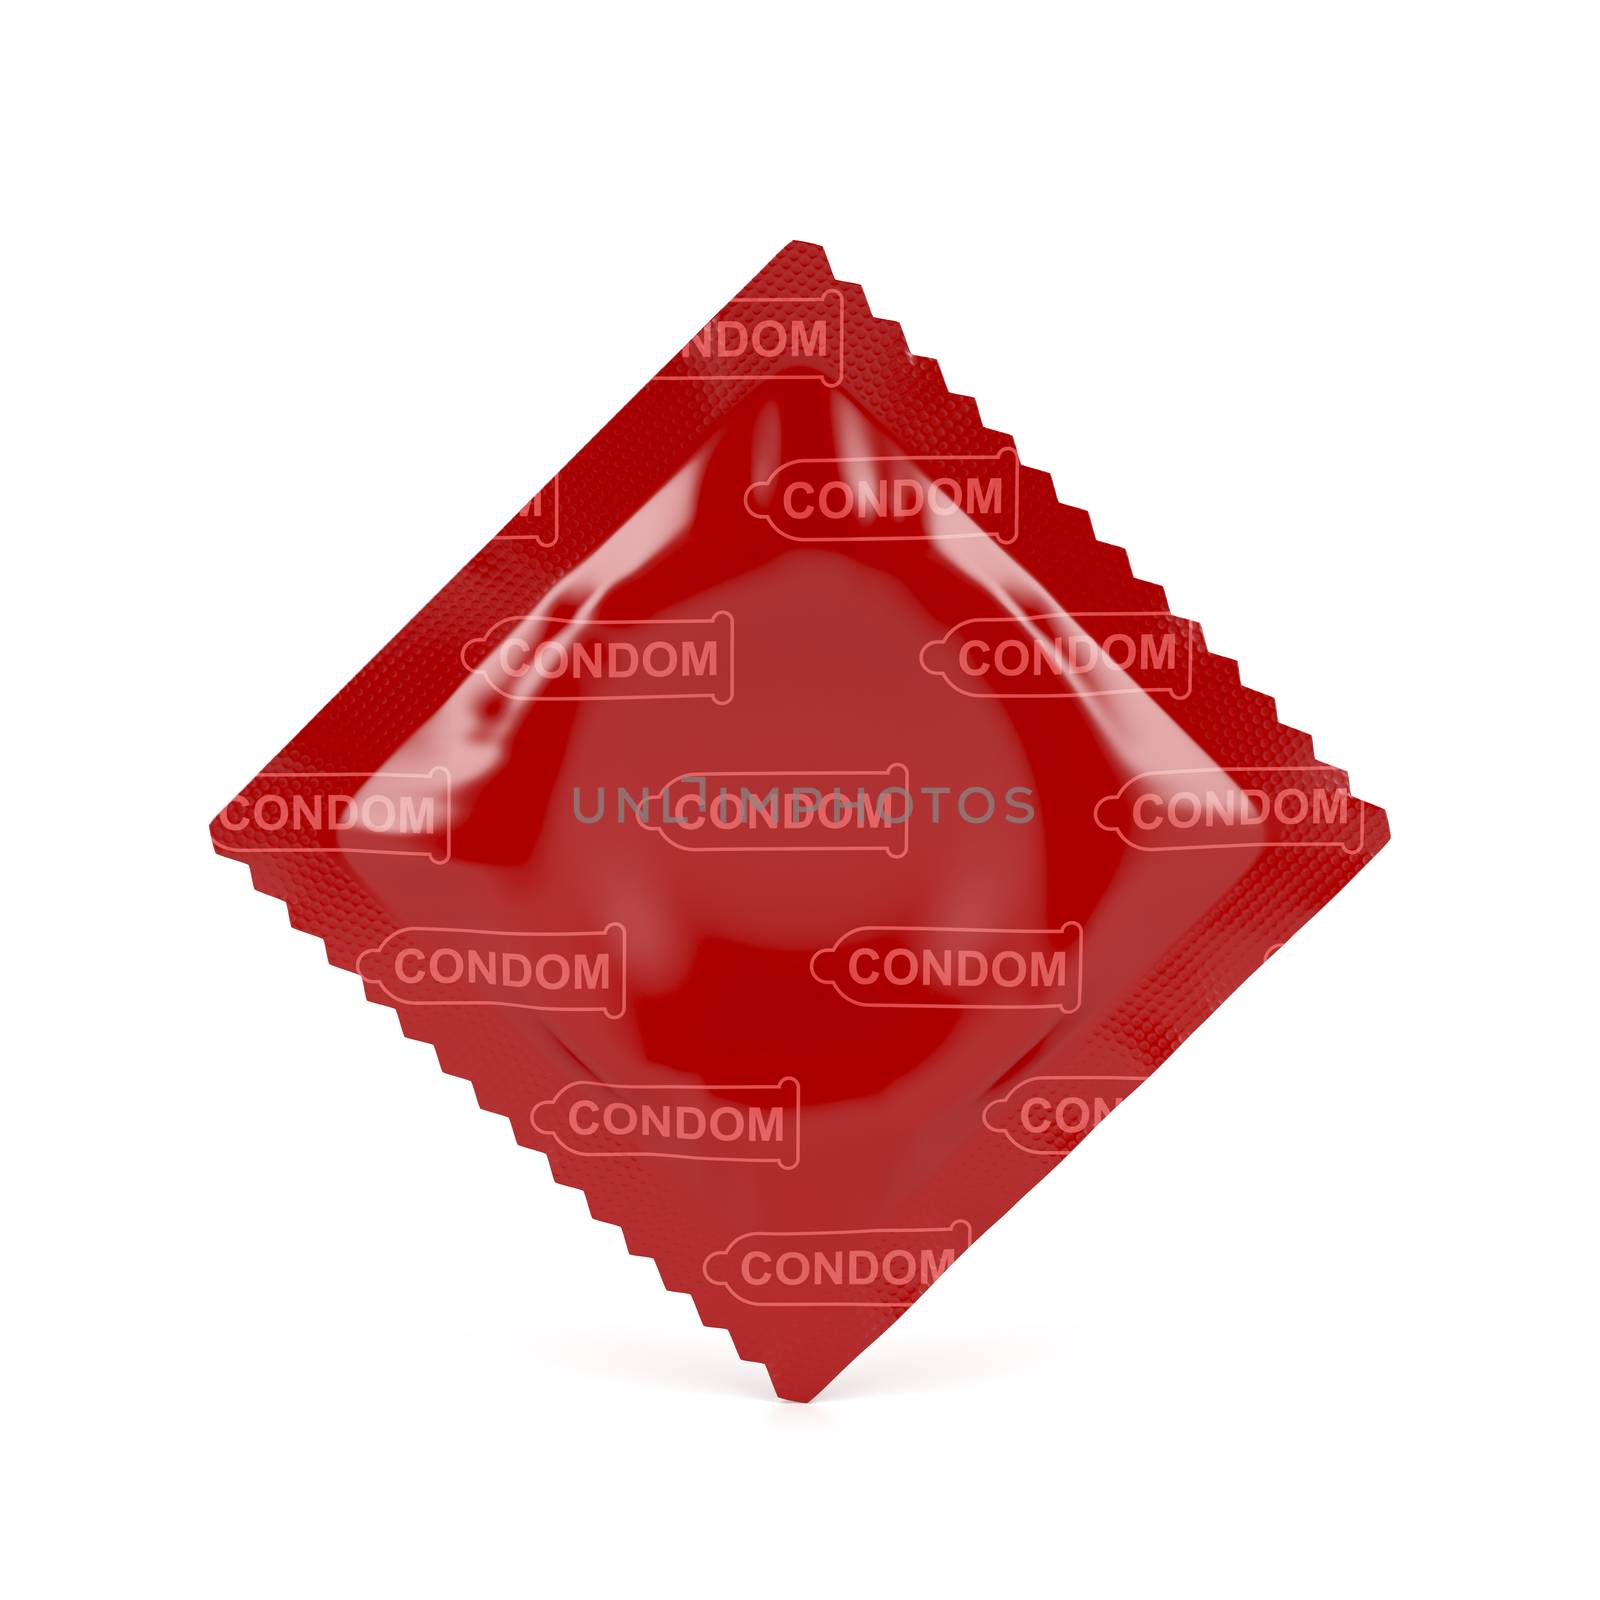 Condom by magraphics